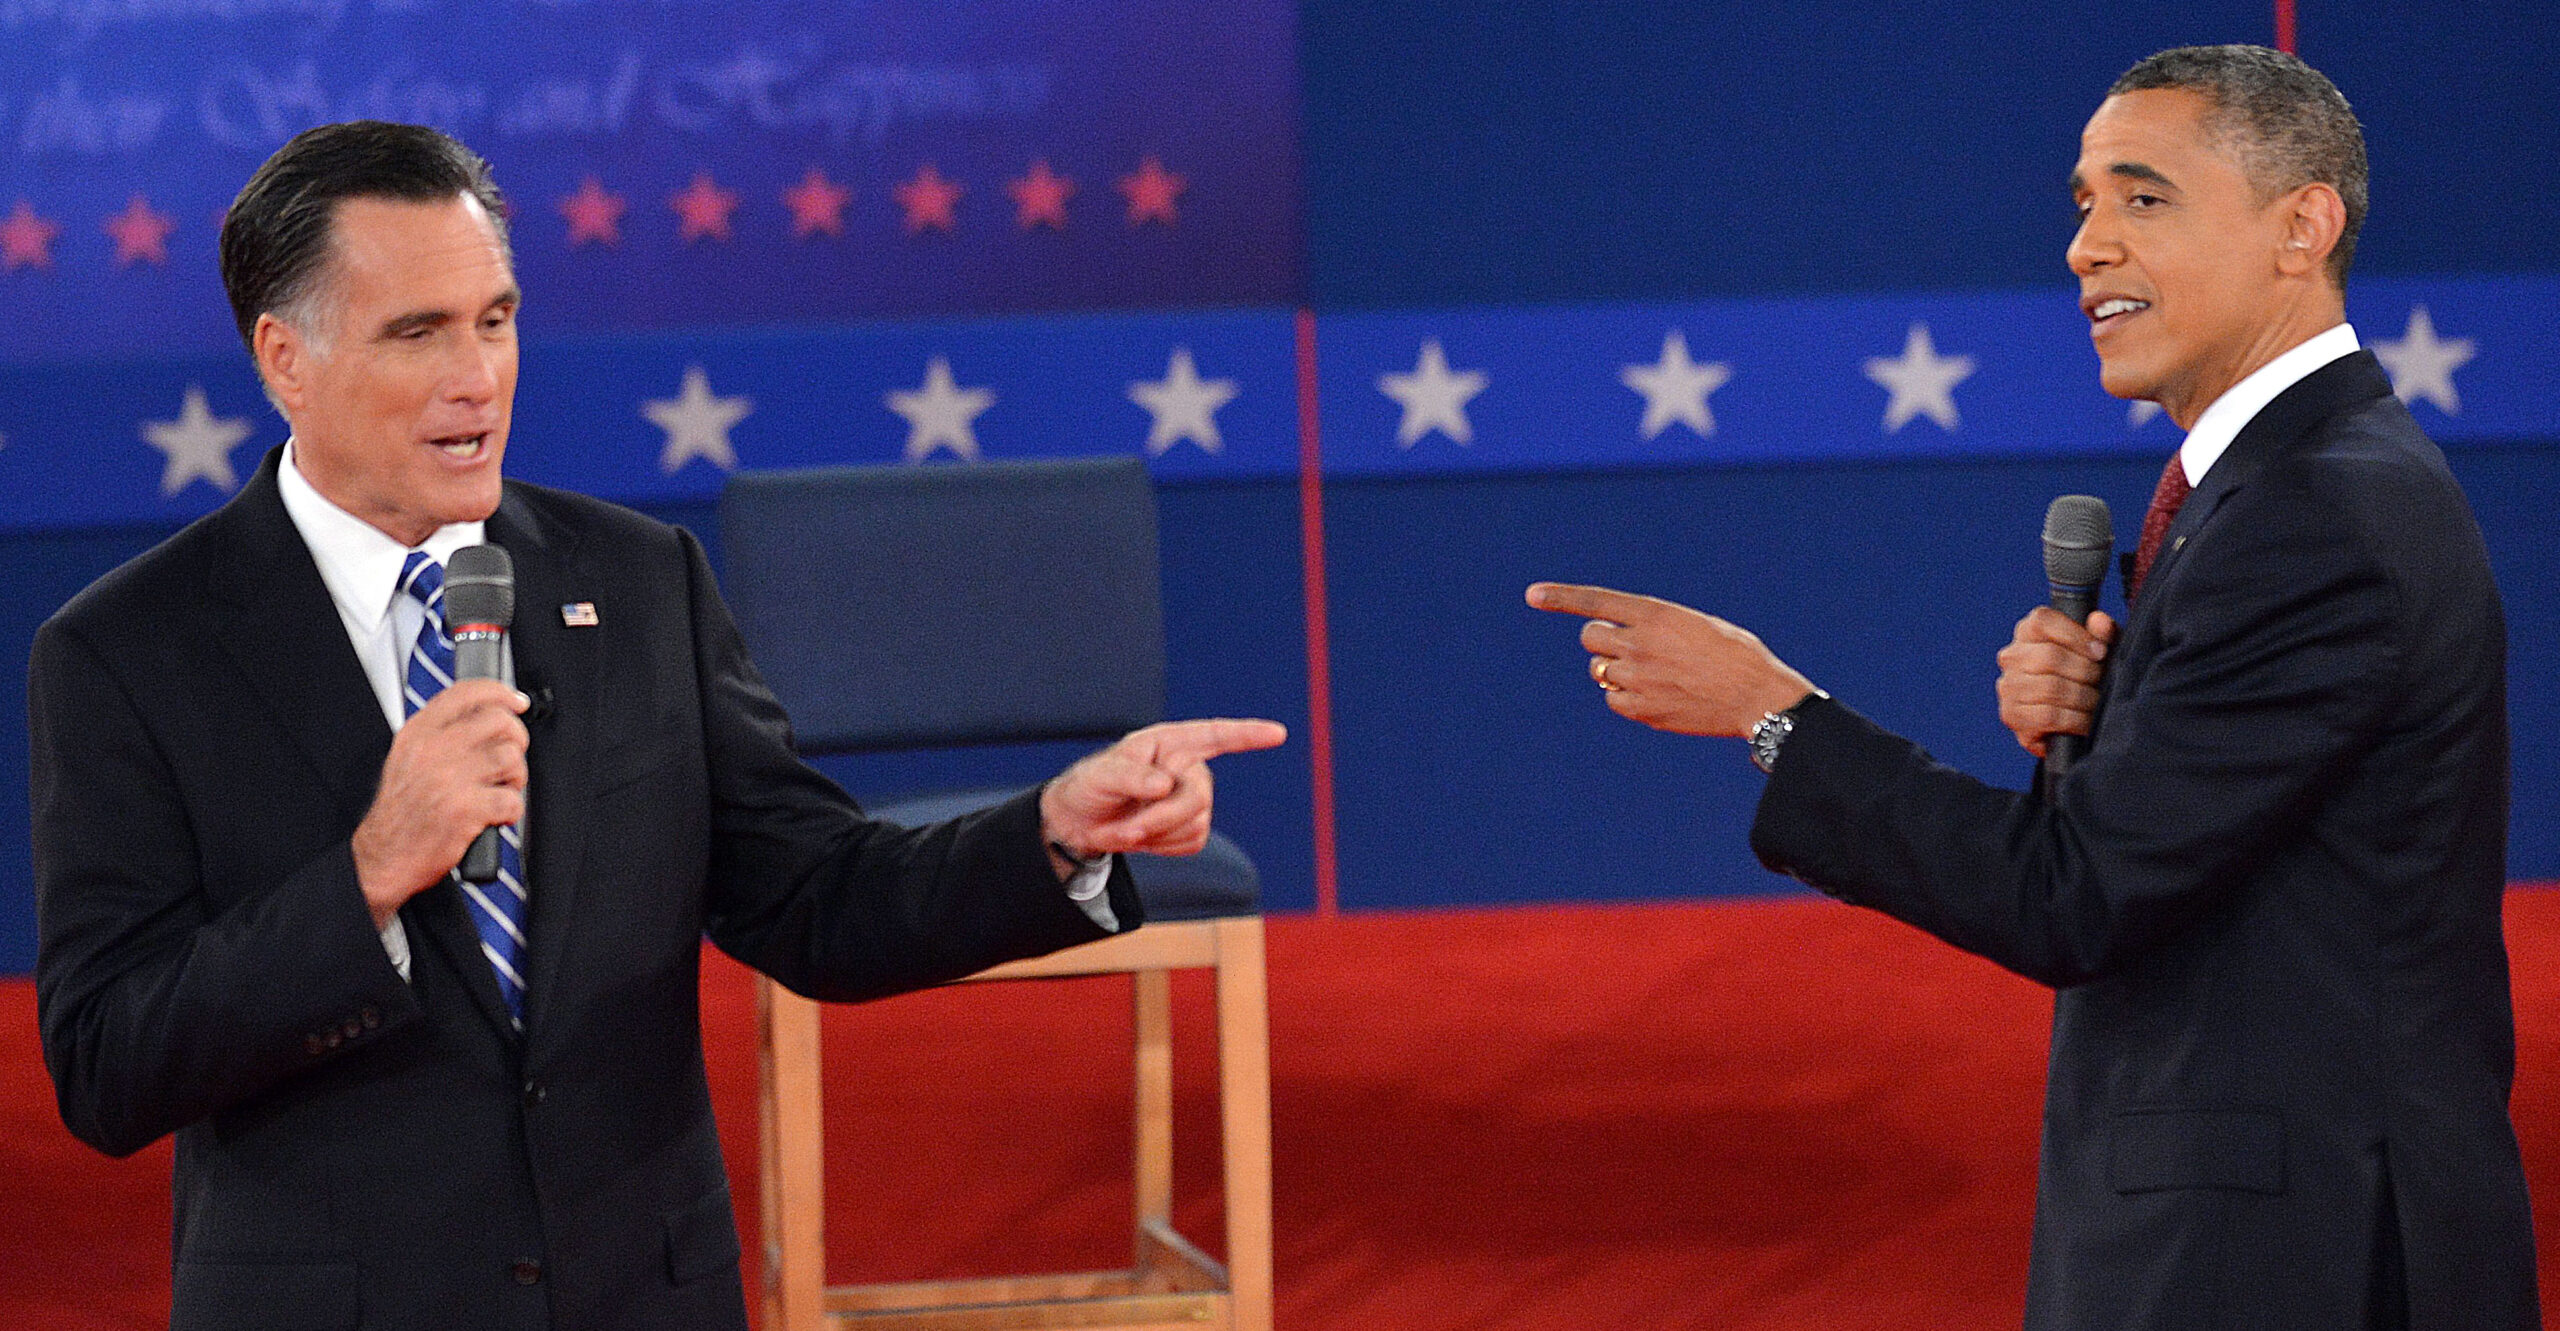 8 Memorable Moments From Past Presidential Debates